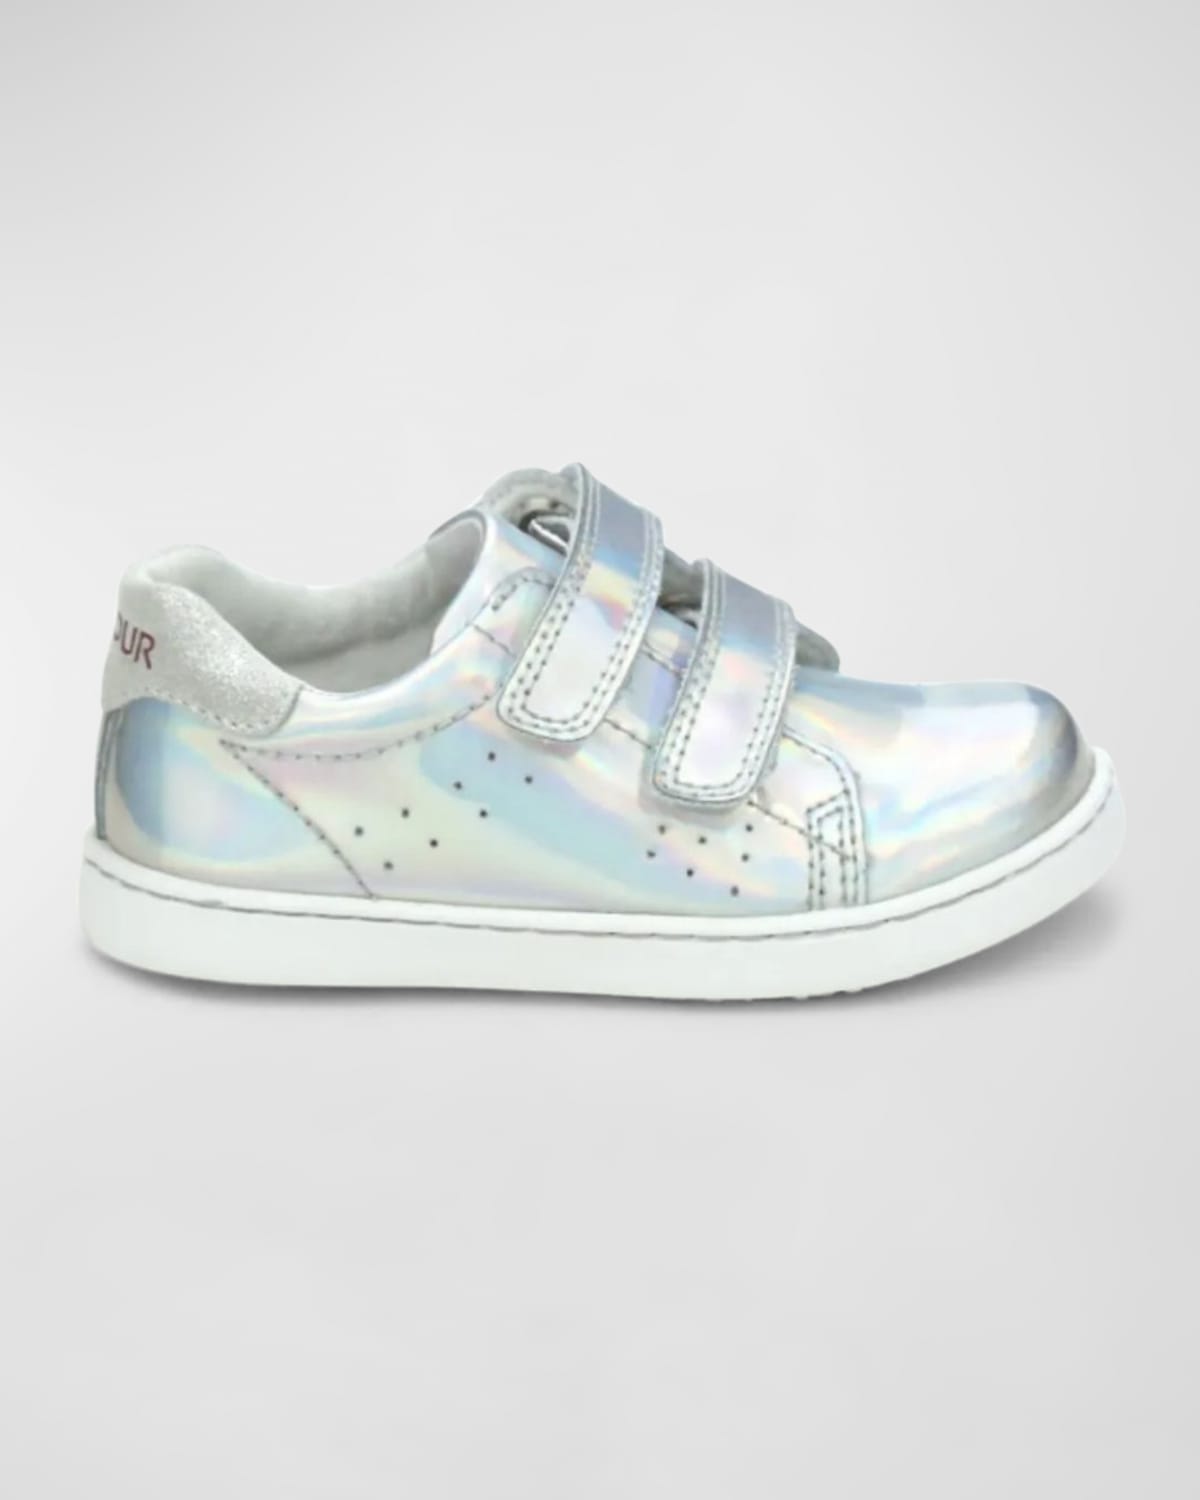 L'amour Shoes Girl's Kenzie Leather Sneakers, Baby/toddlers/kids In Holo